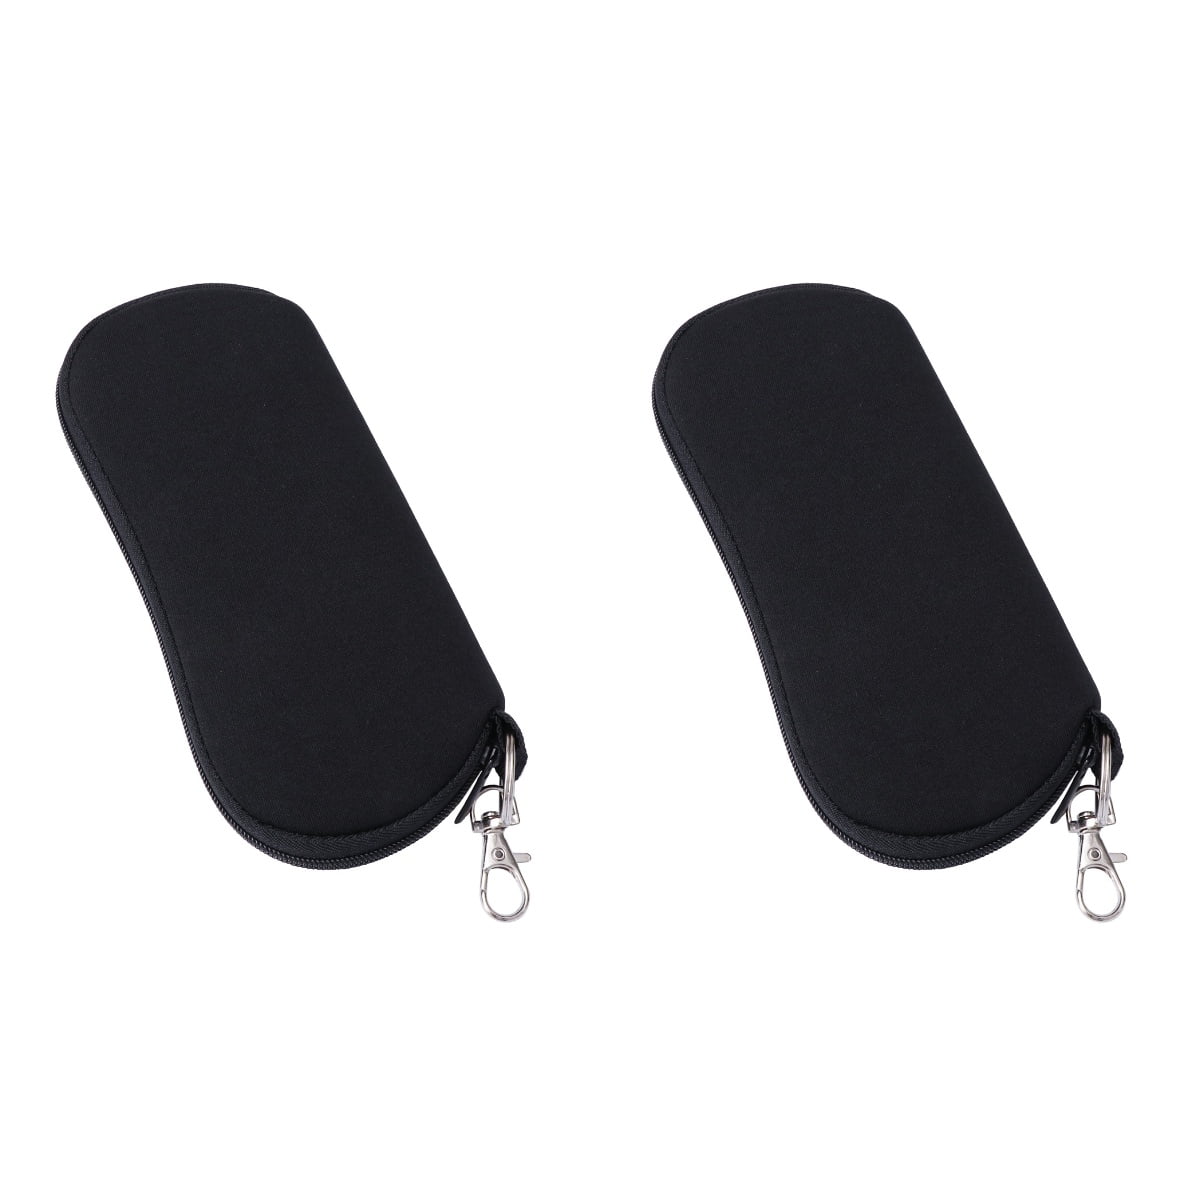 2 Pack Glasses Case Eyeglass Stand Sunglasses Cases Spectacle Frame ...